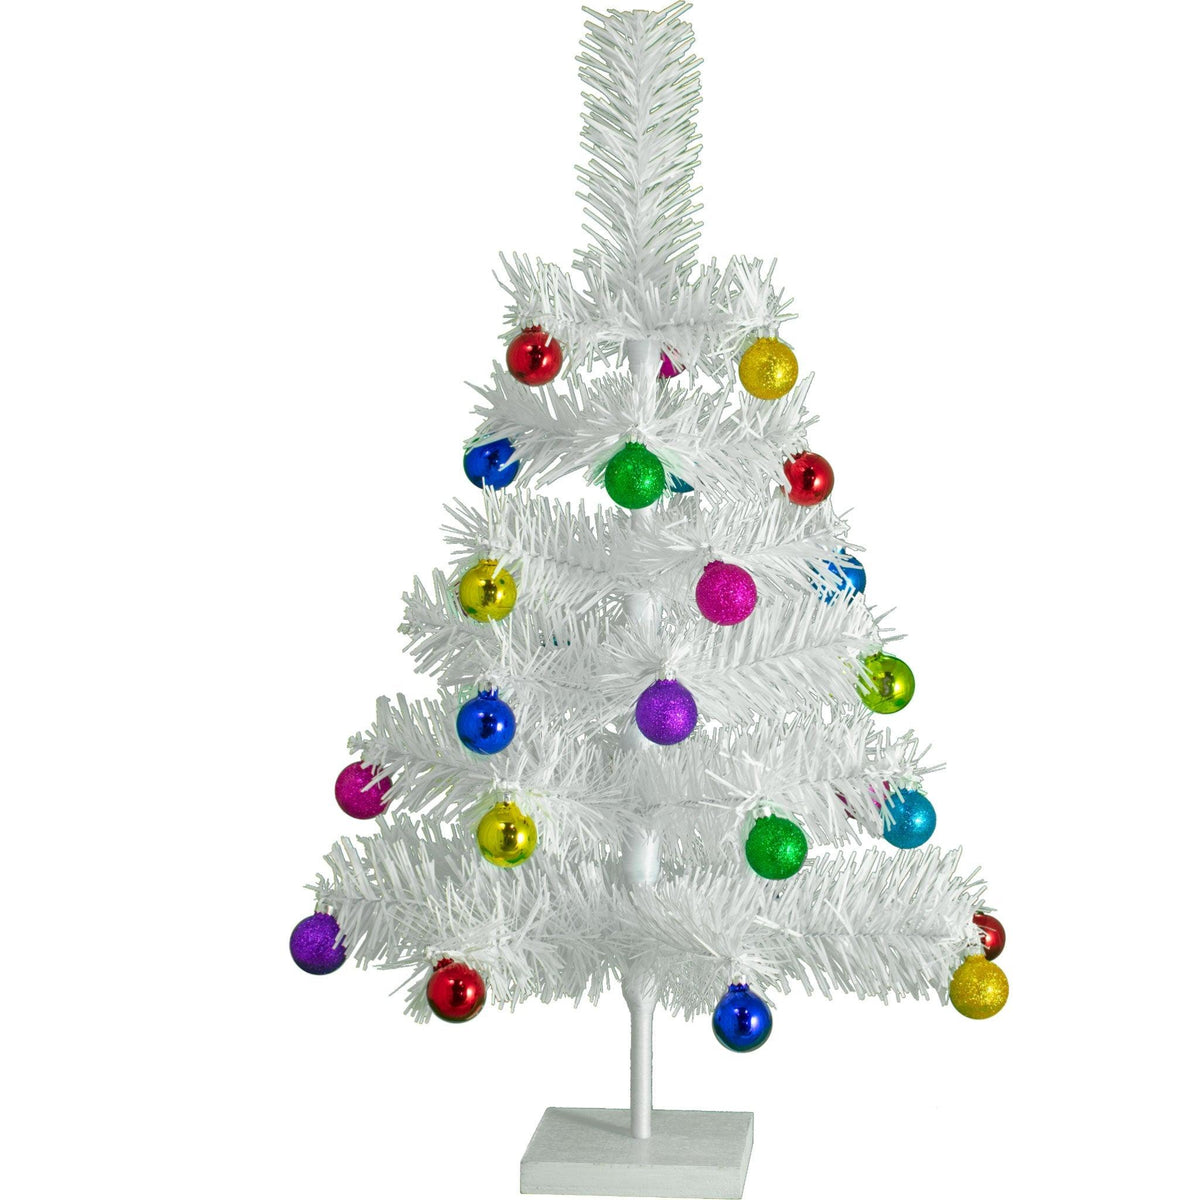 Lee Display's 24in White Tinsel Christmas Trees look cute with mini ball ornaments.  Ornaments not included.  Shop for your holiday decor with Lee Display